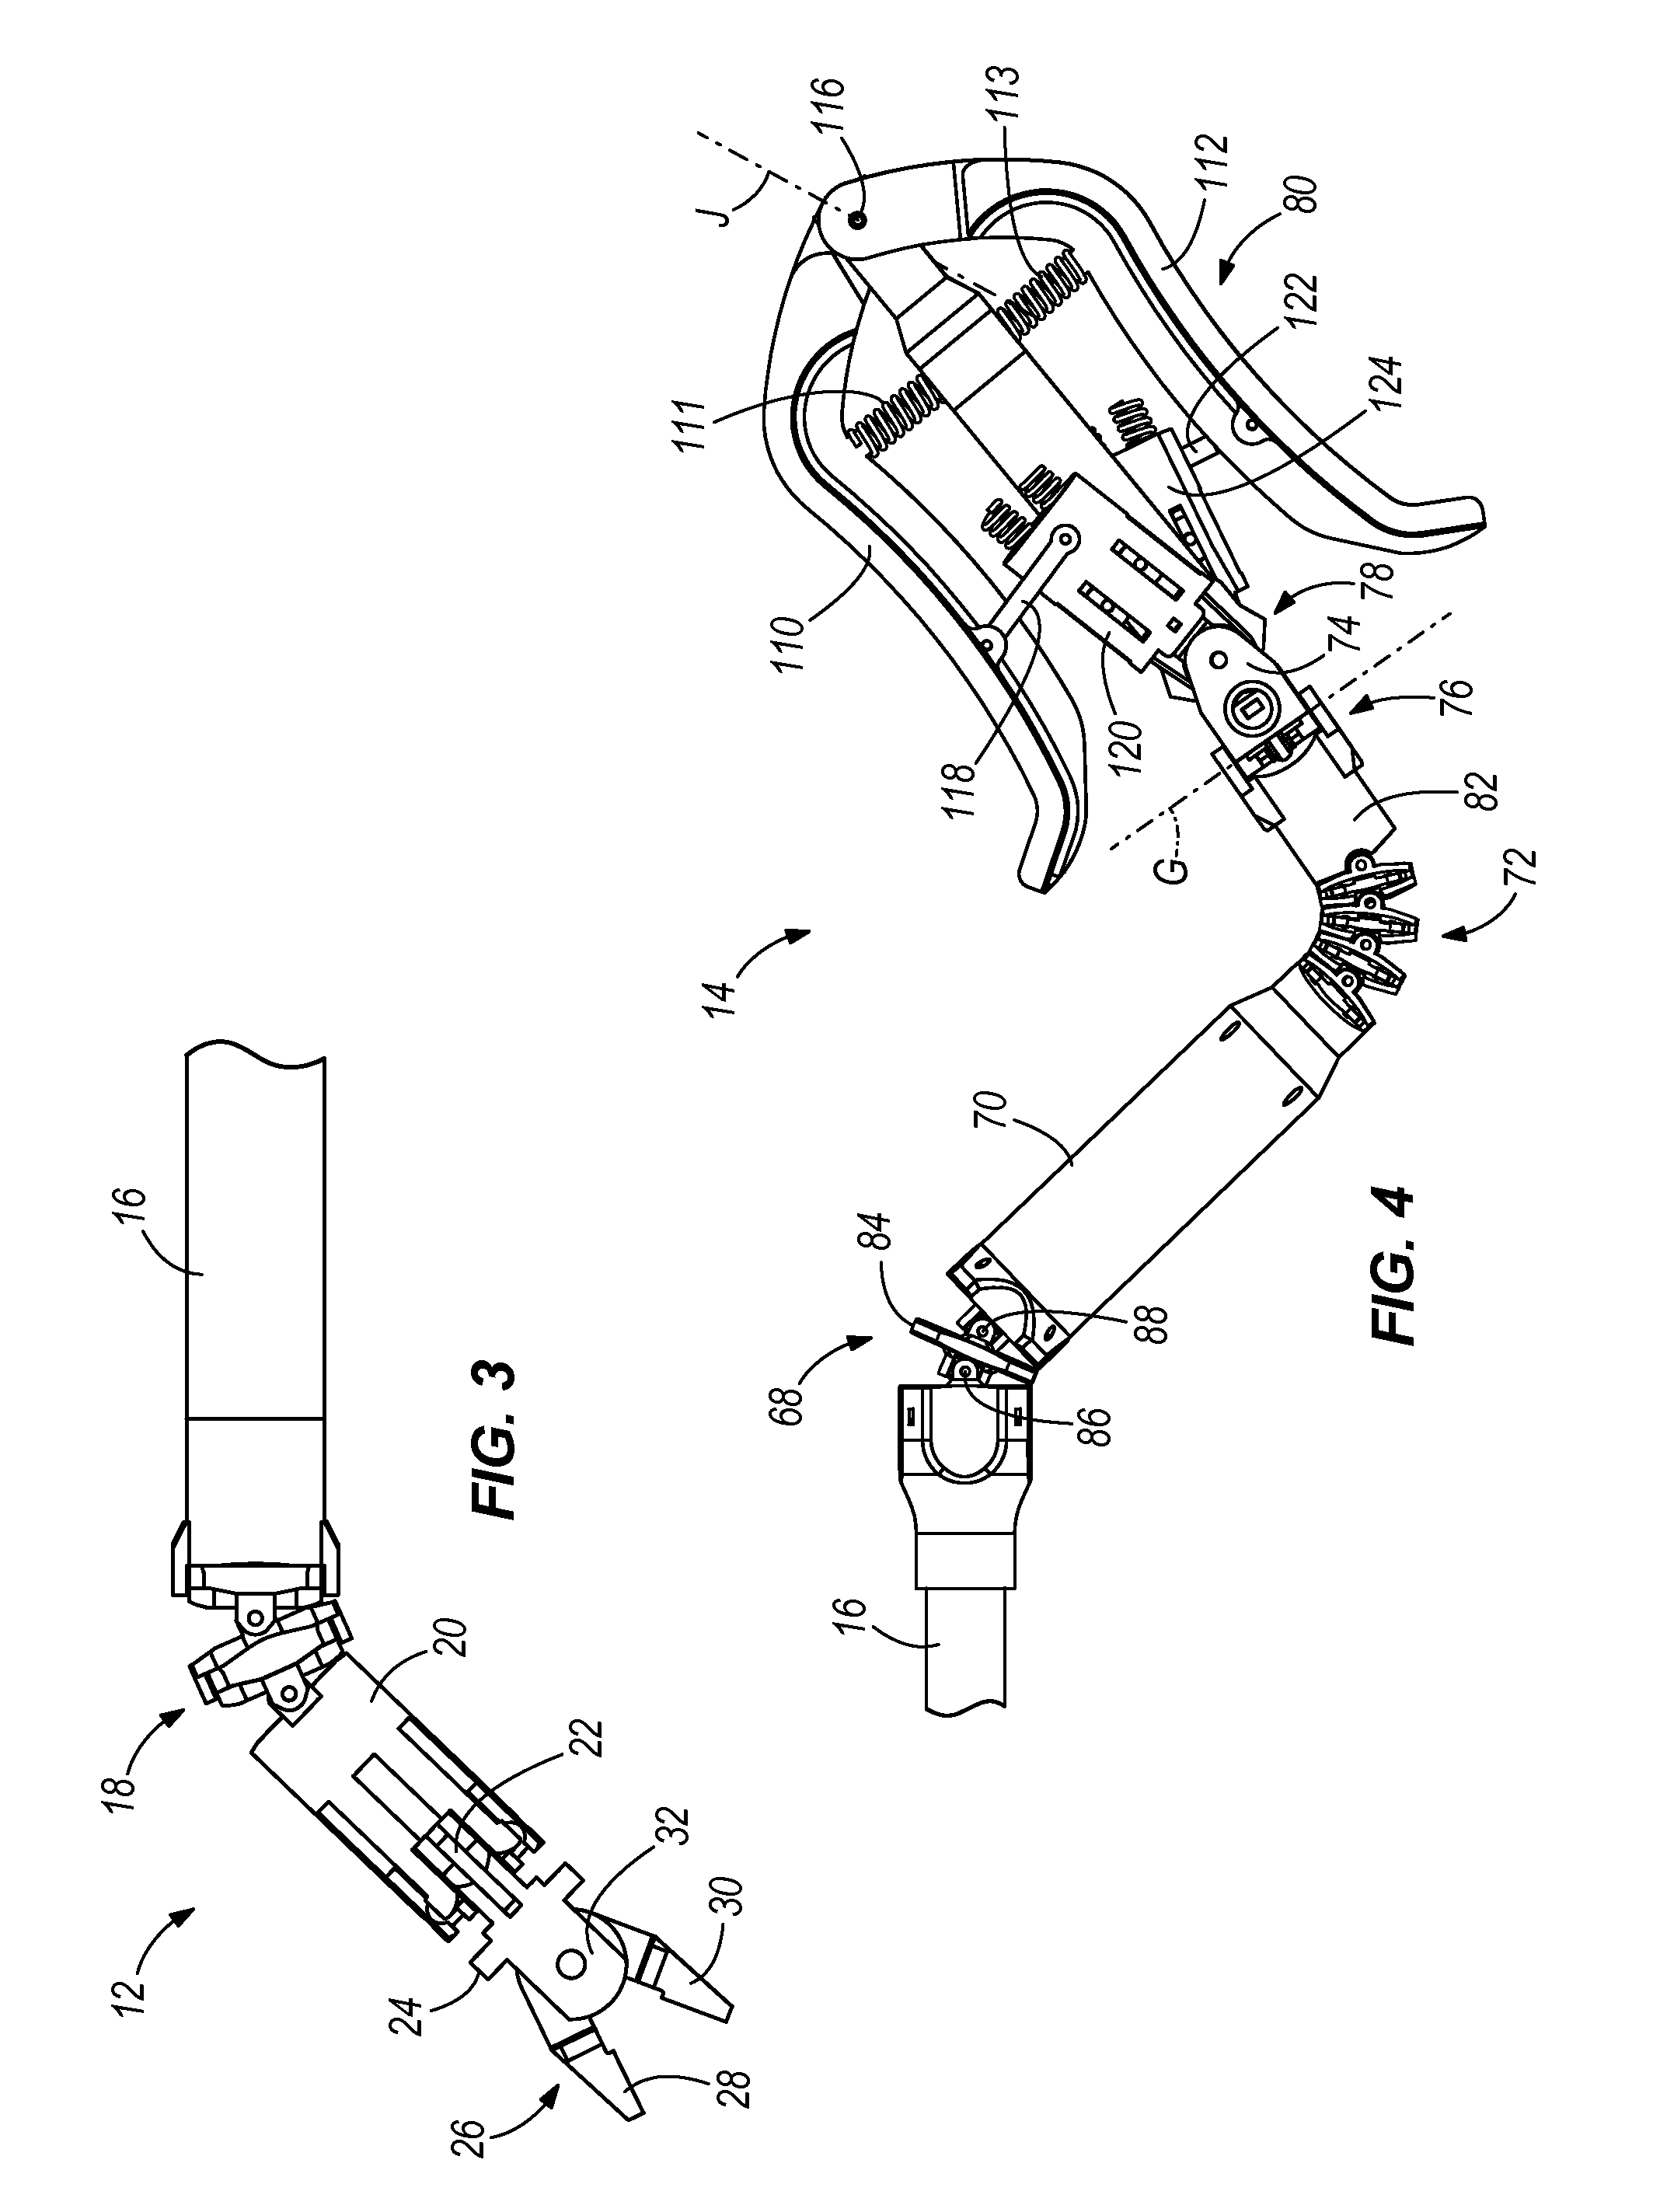 Dexterous surgical manipulator and method of use